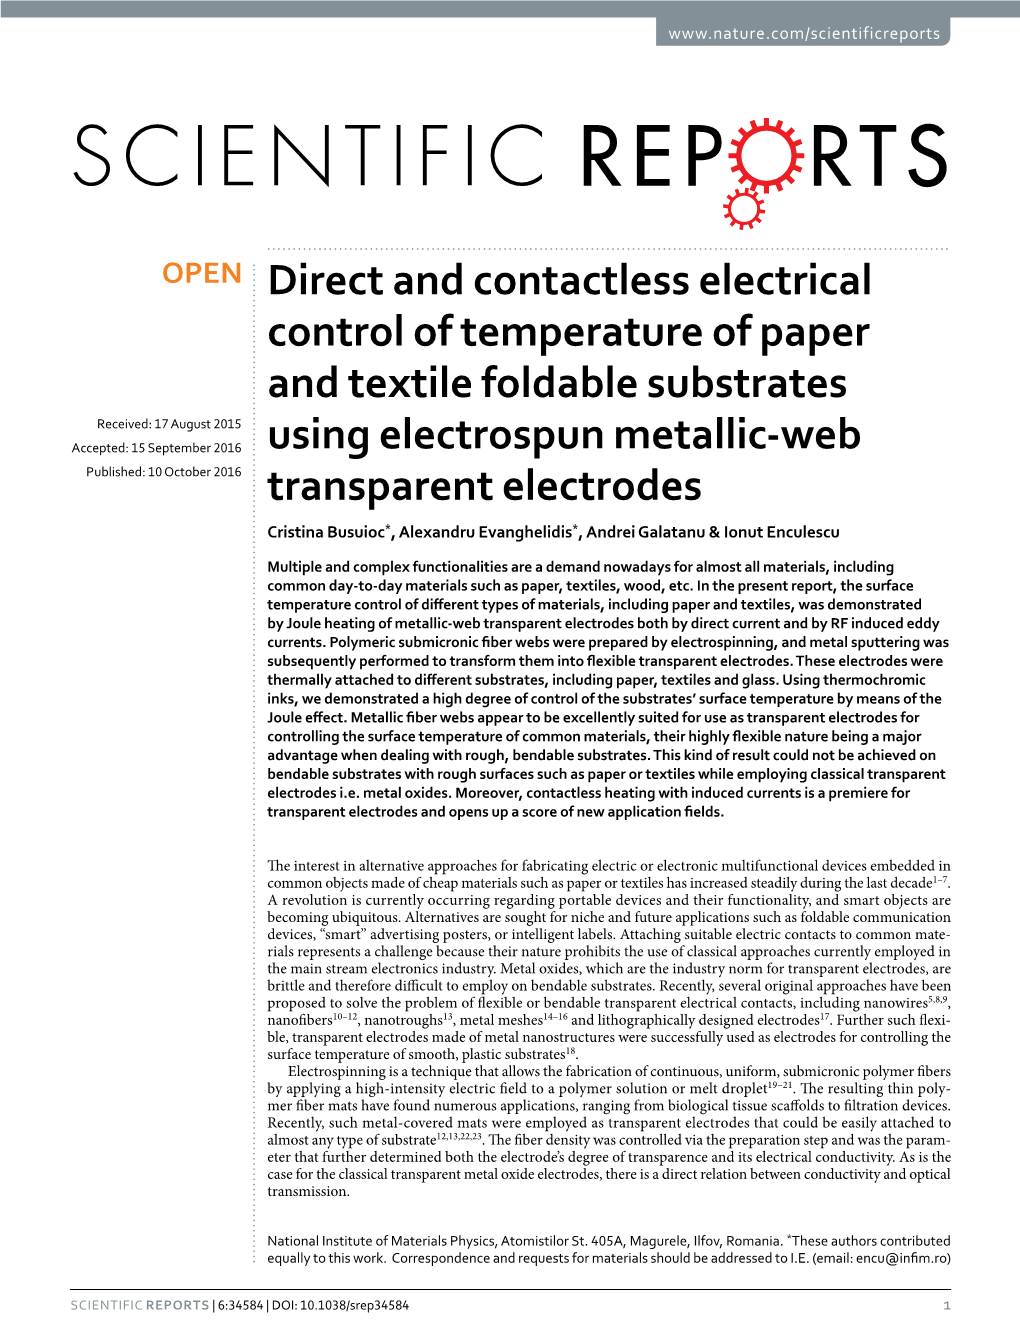 Direct and Contactless Electrical Control of Temperature of Paper And